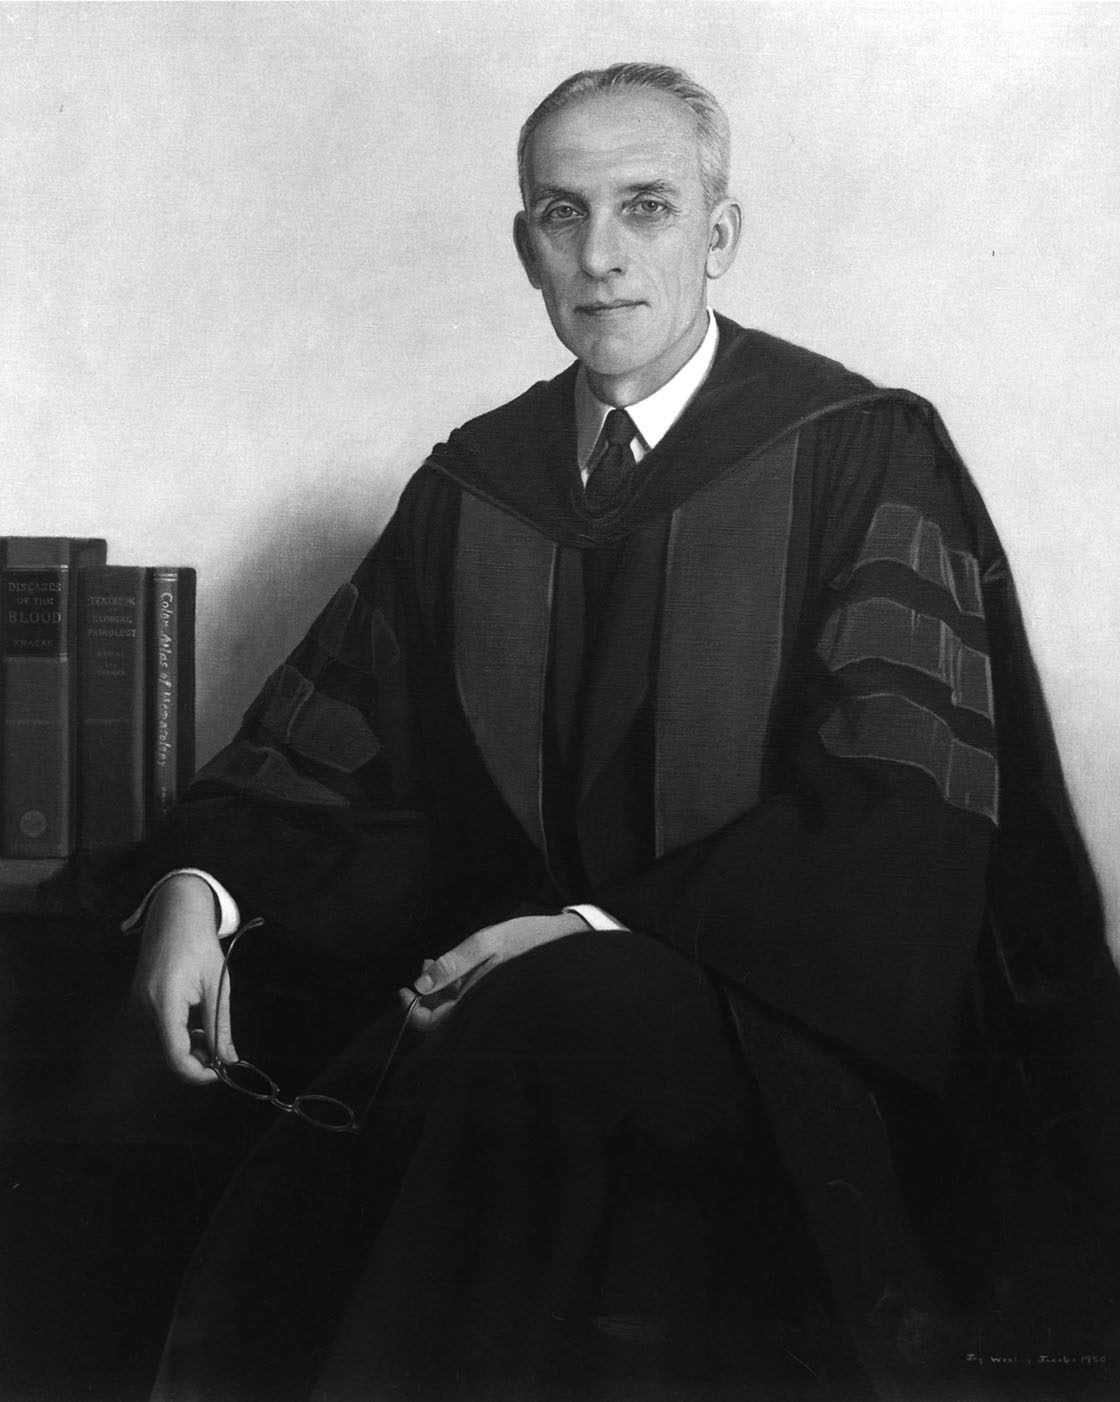 1944-Roy R. Kracke Becomes First Dean of the Medical School